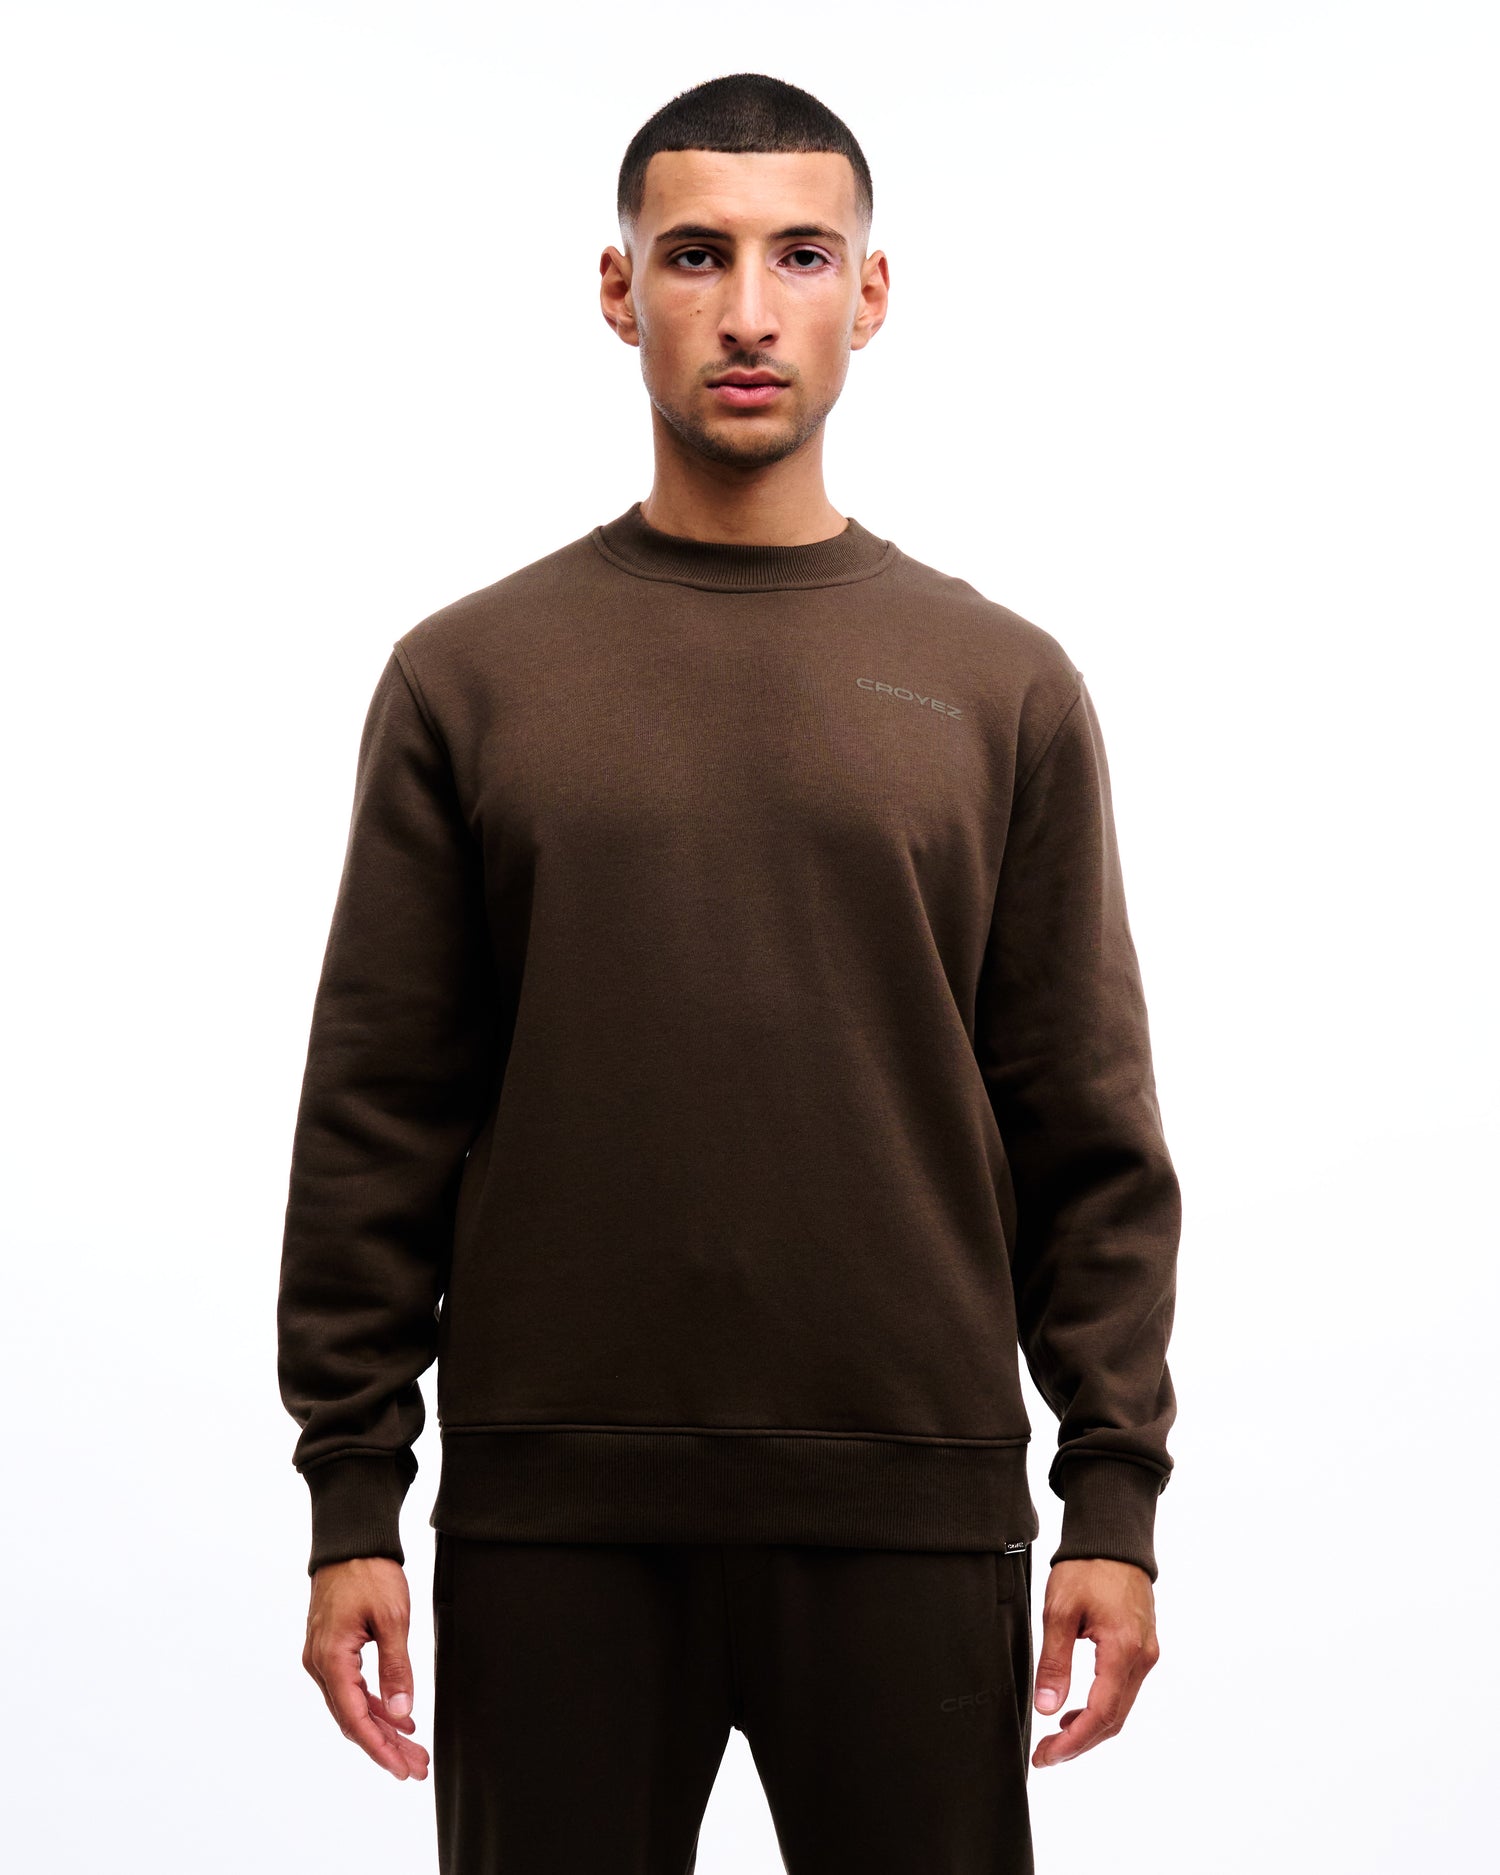 CROYEZ ORGANETTO SWEATER - BROWN